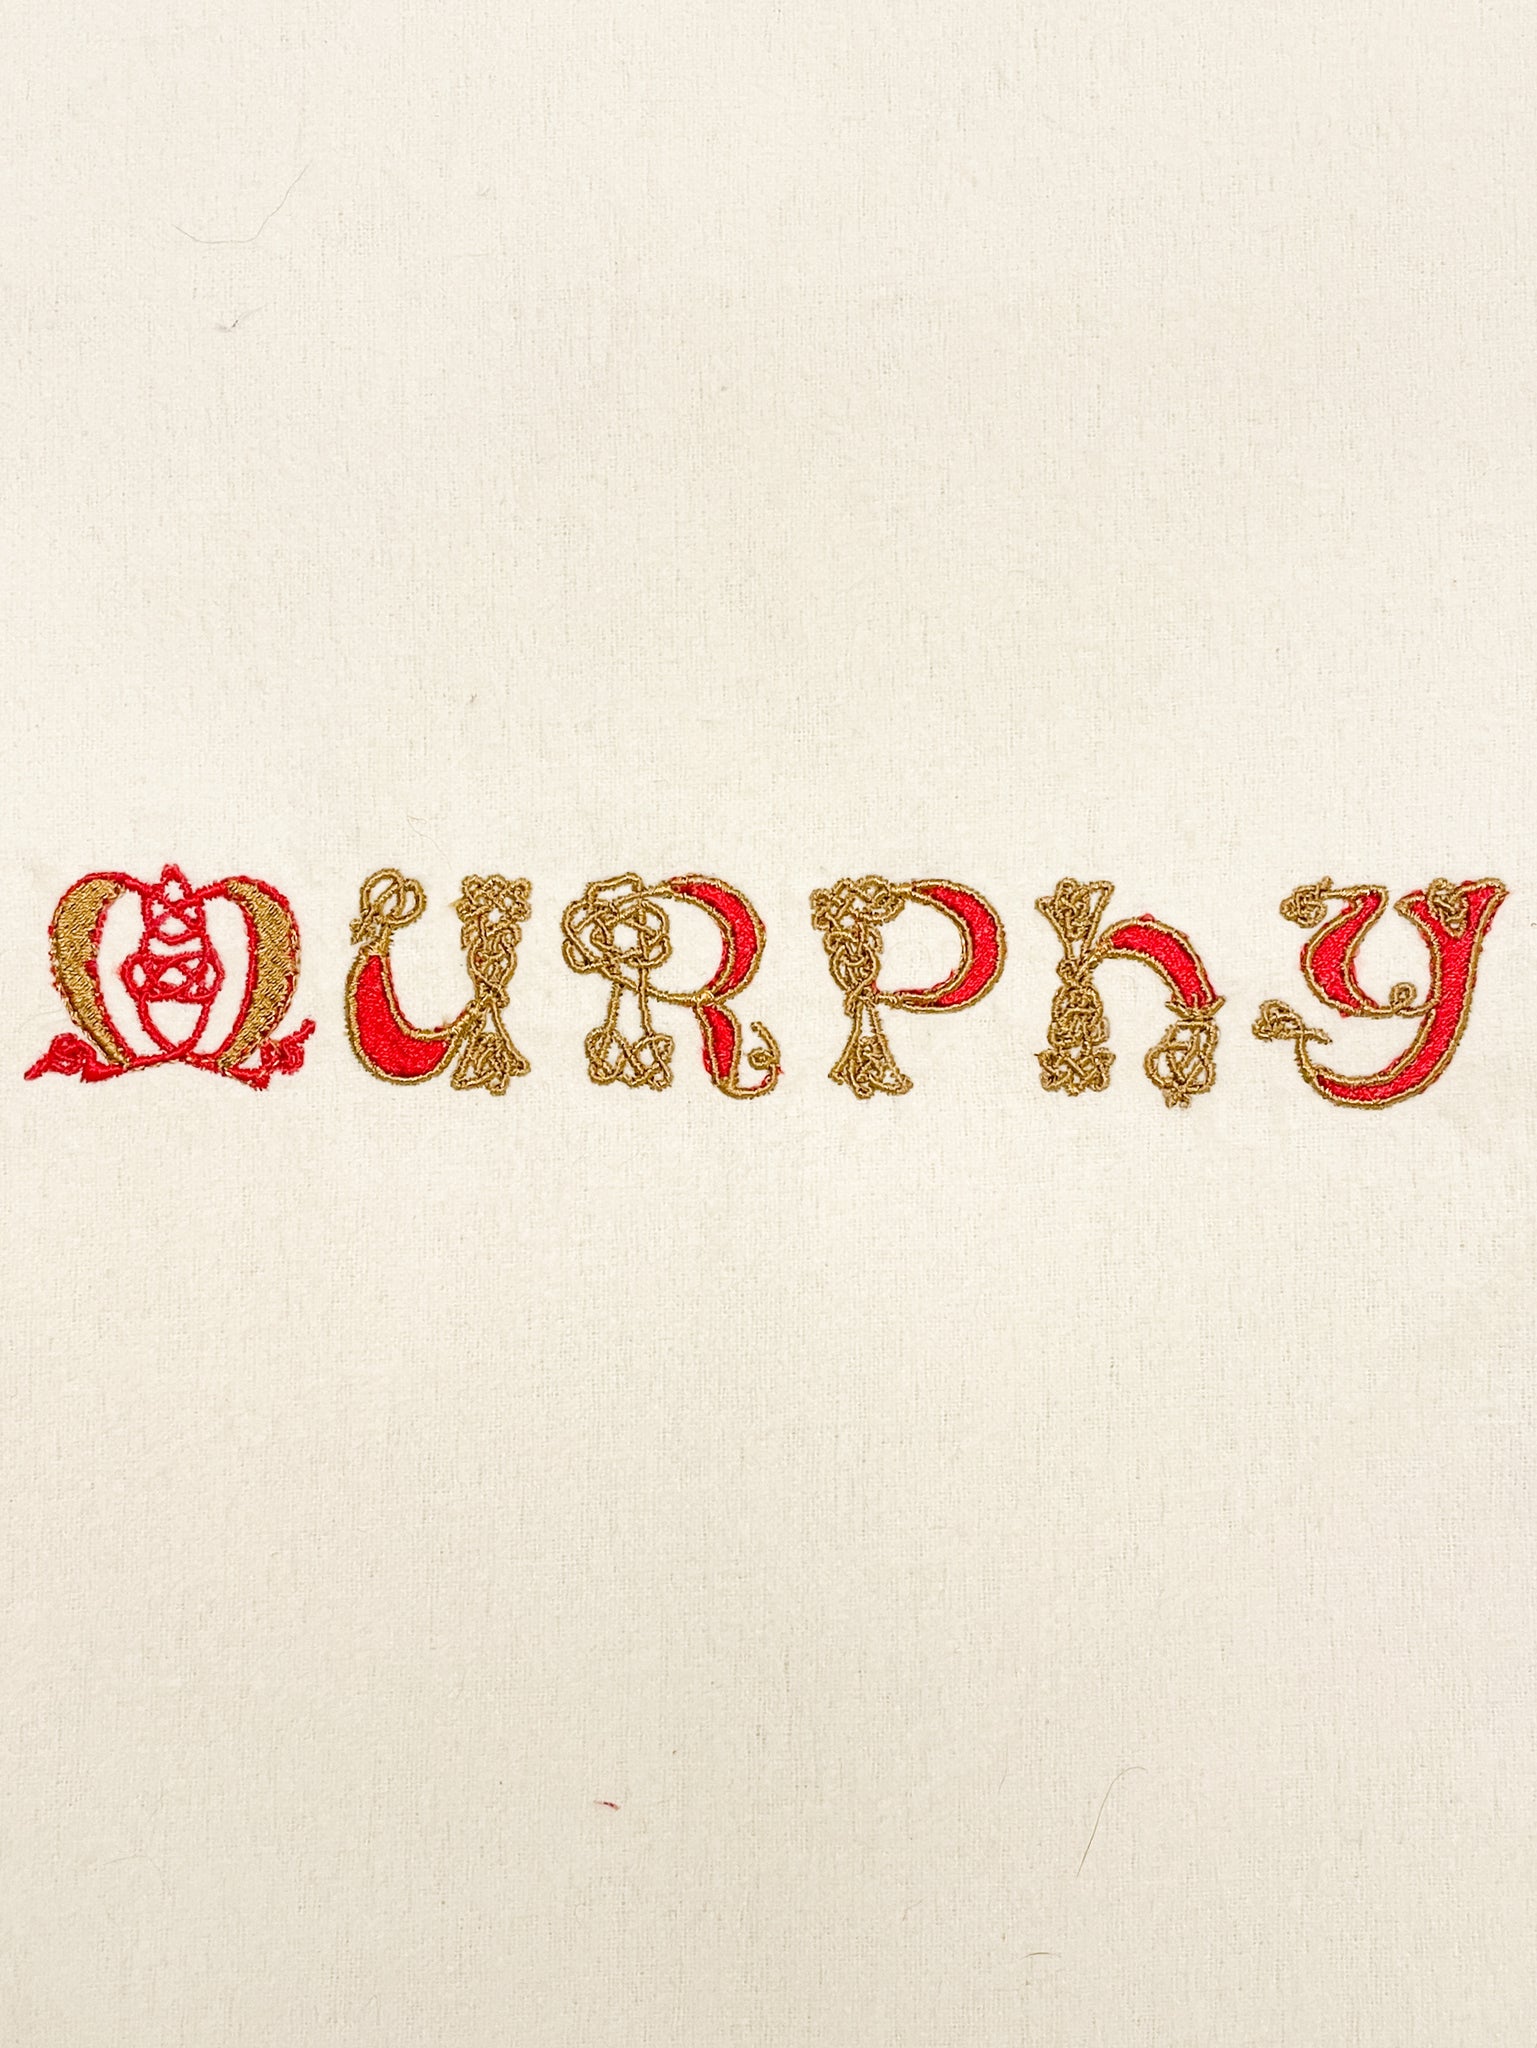 Machine Embroidery on Off White Cotton Flannel - "Murphy"